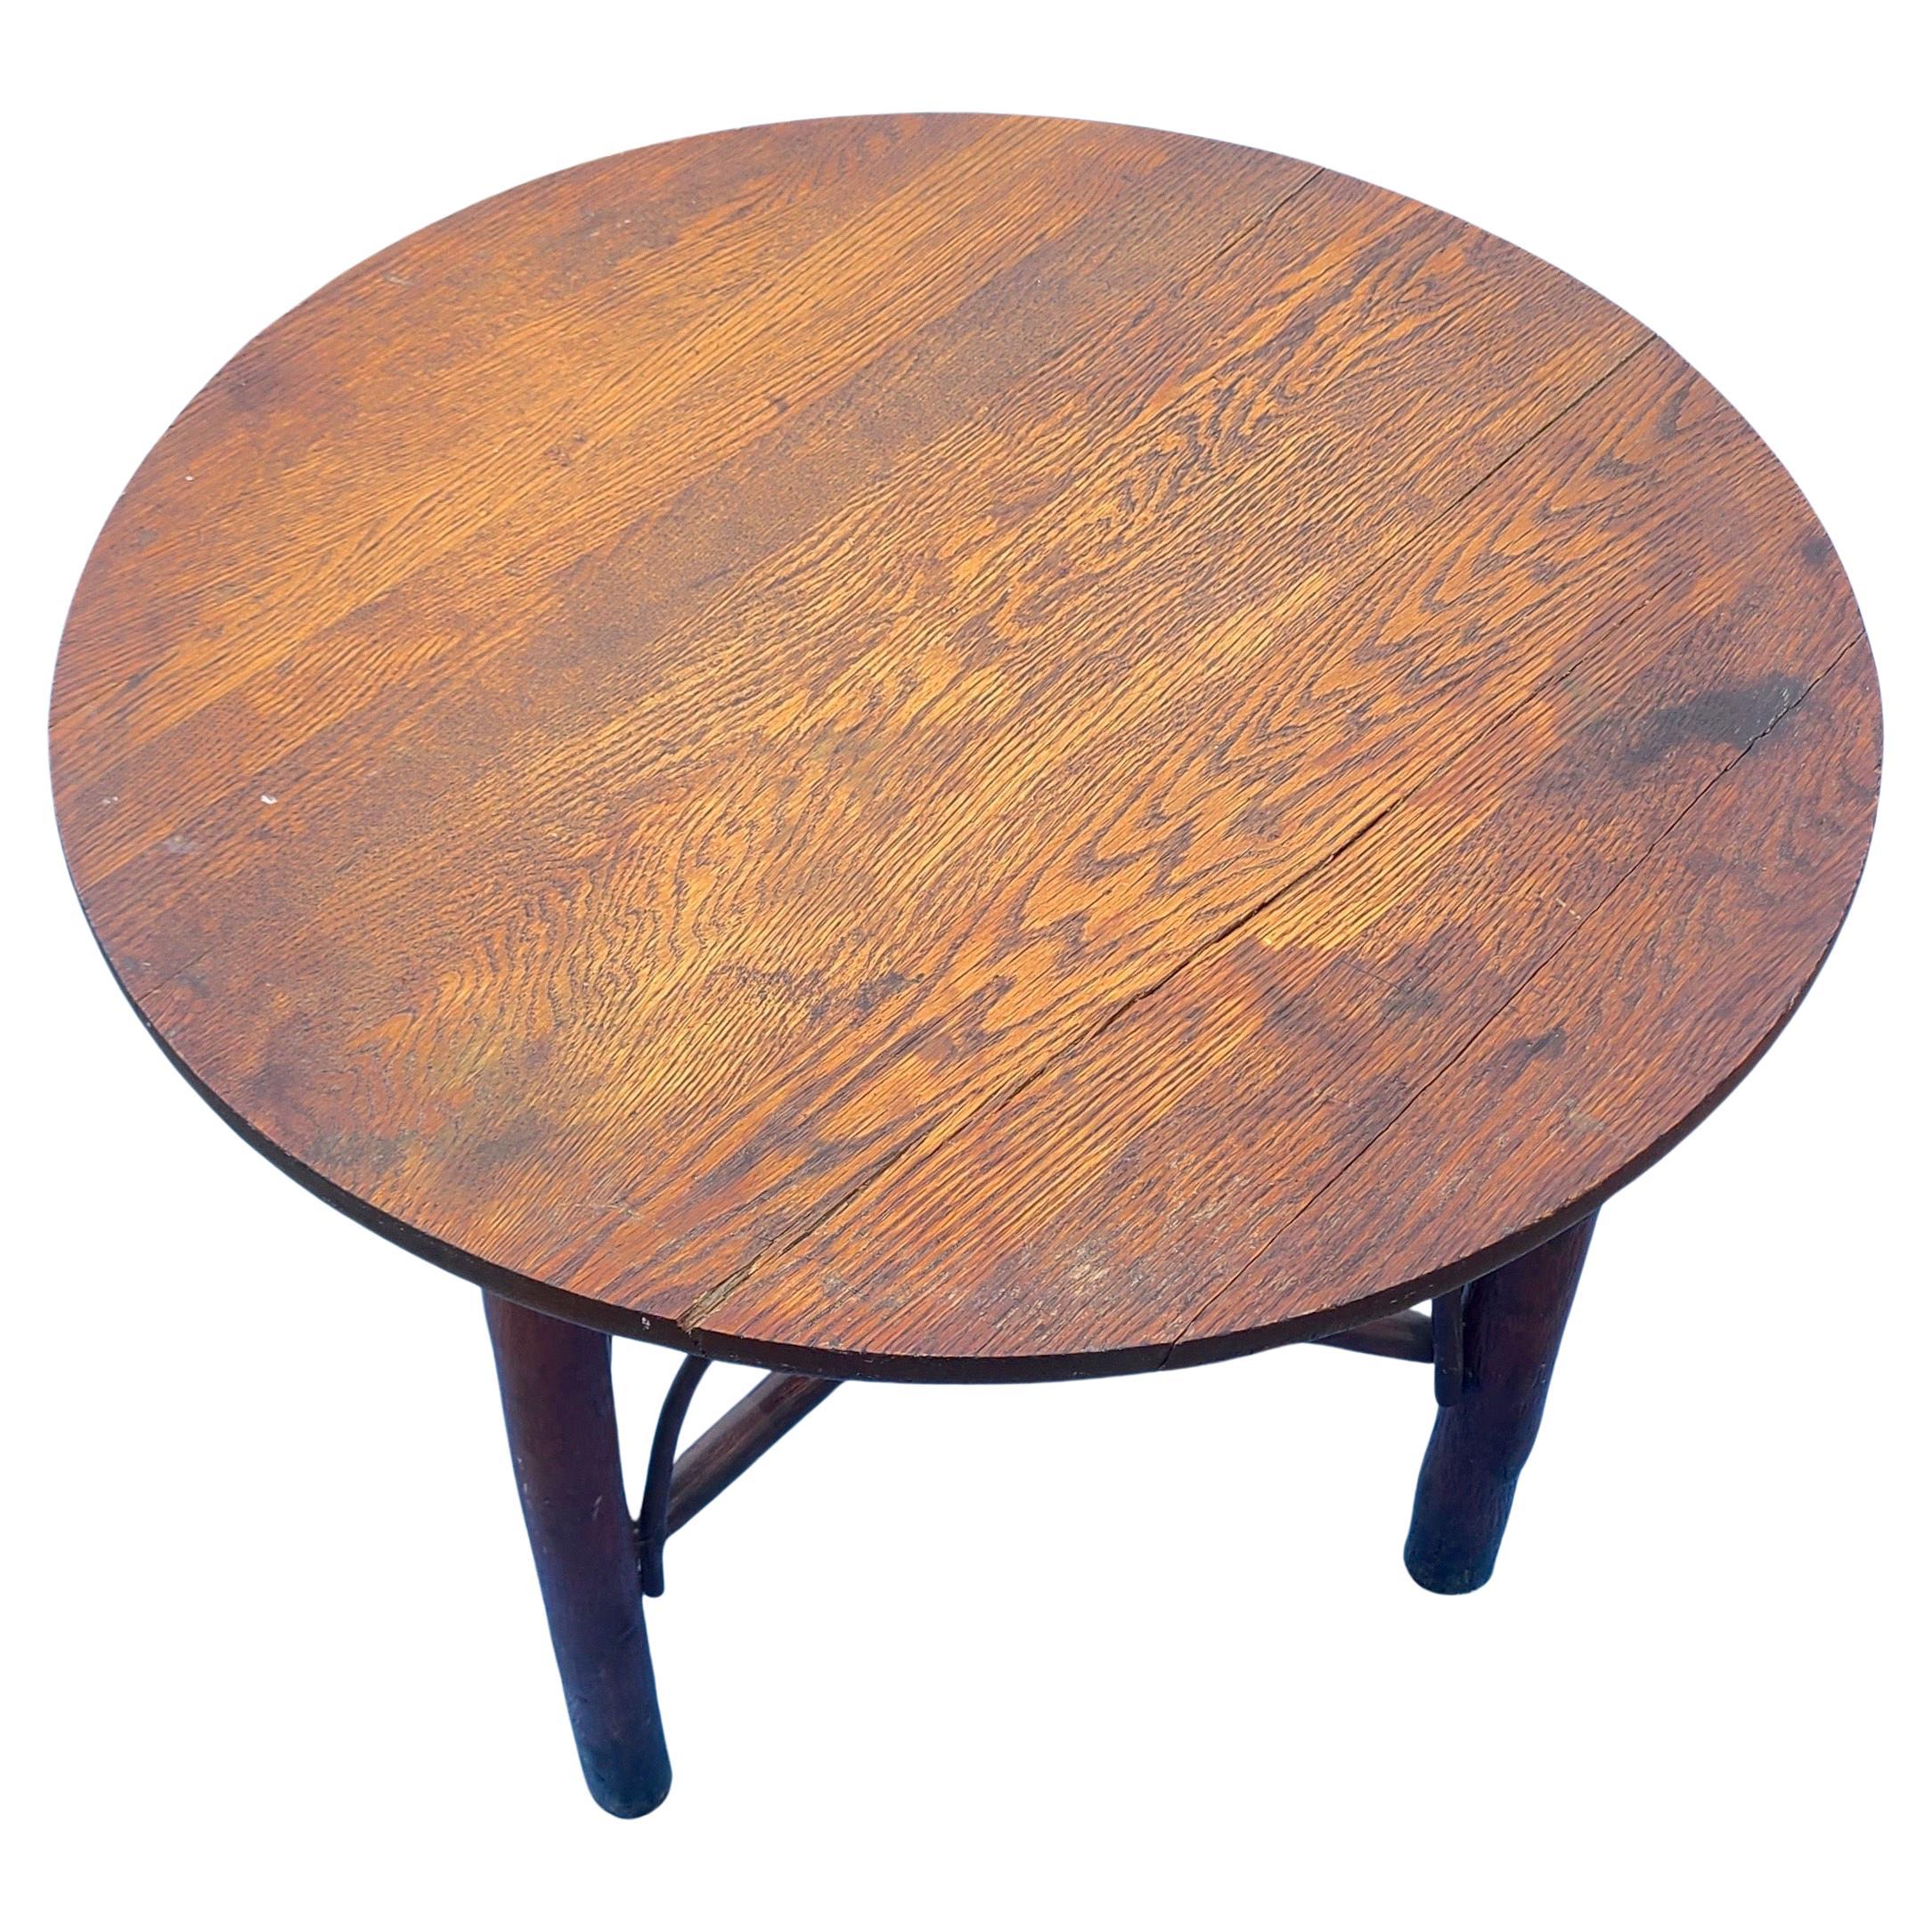 Tavern Table by Old Hickory Arts & Crafts Mission 1